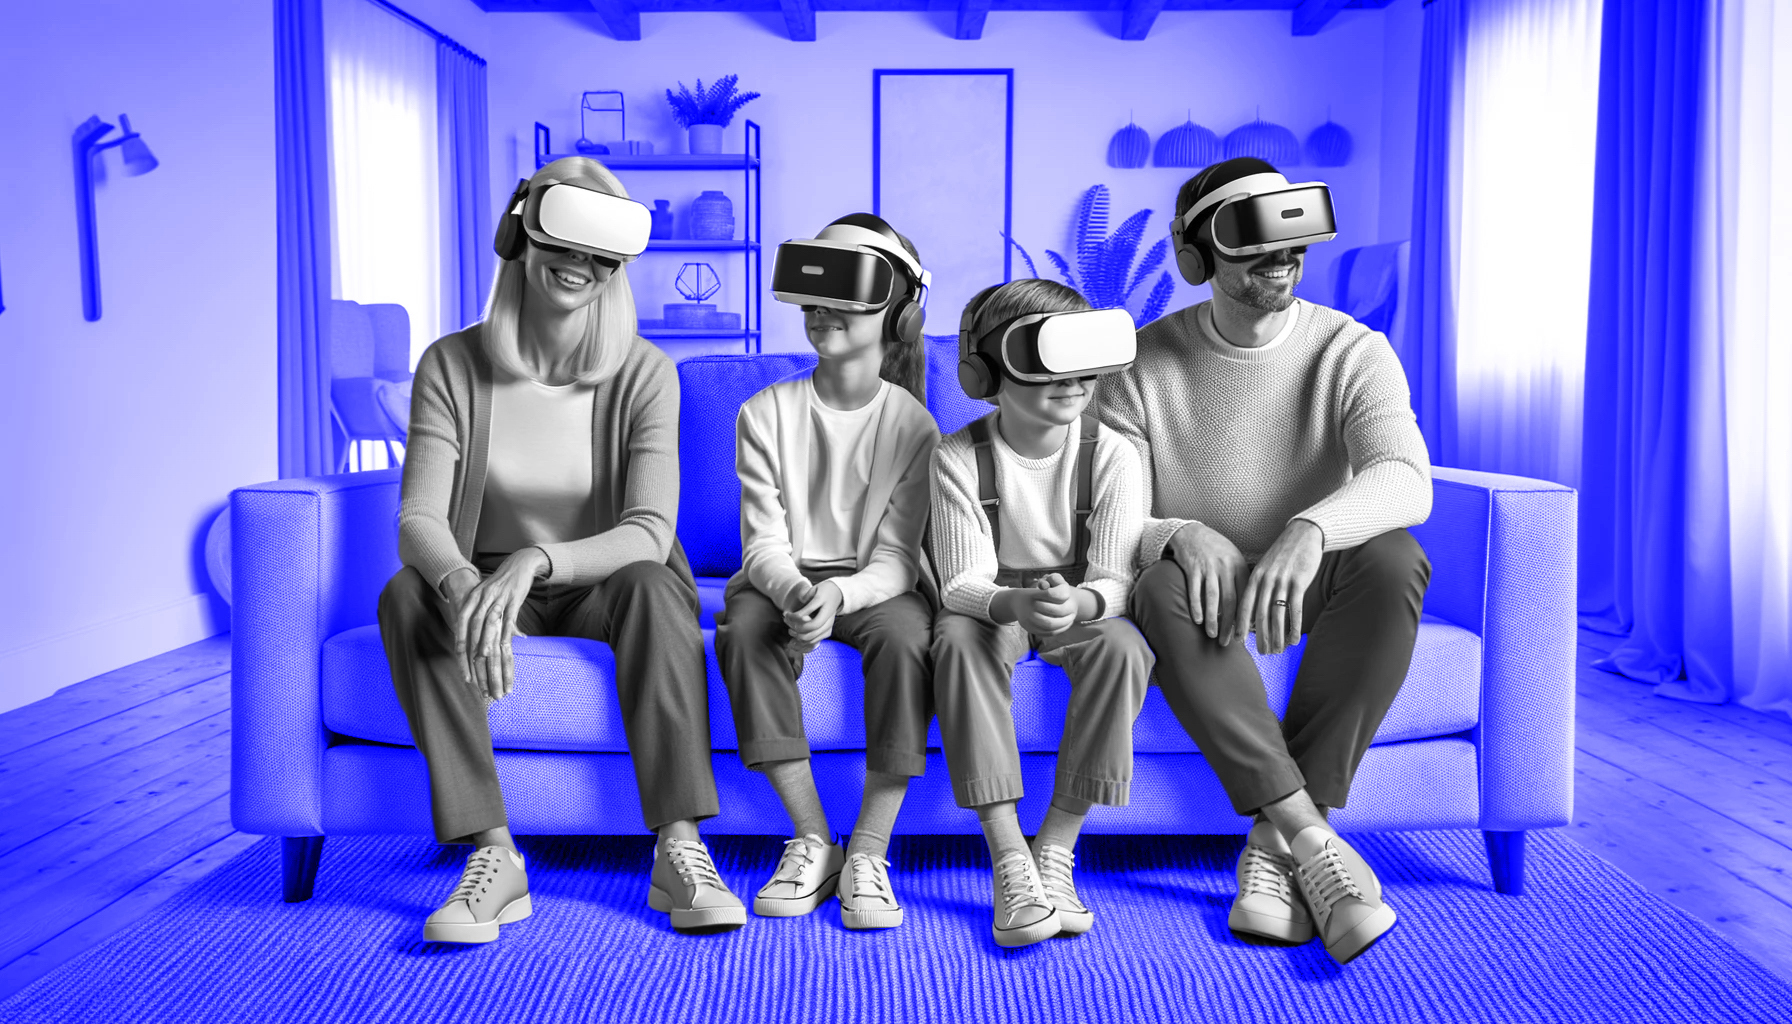 A family enjoys a virtual reality experience together, sitting on a sofa, each wearing VR headsets, immersed in a digital world from the comfort of their blue-hued living room.